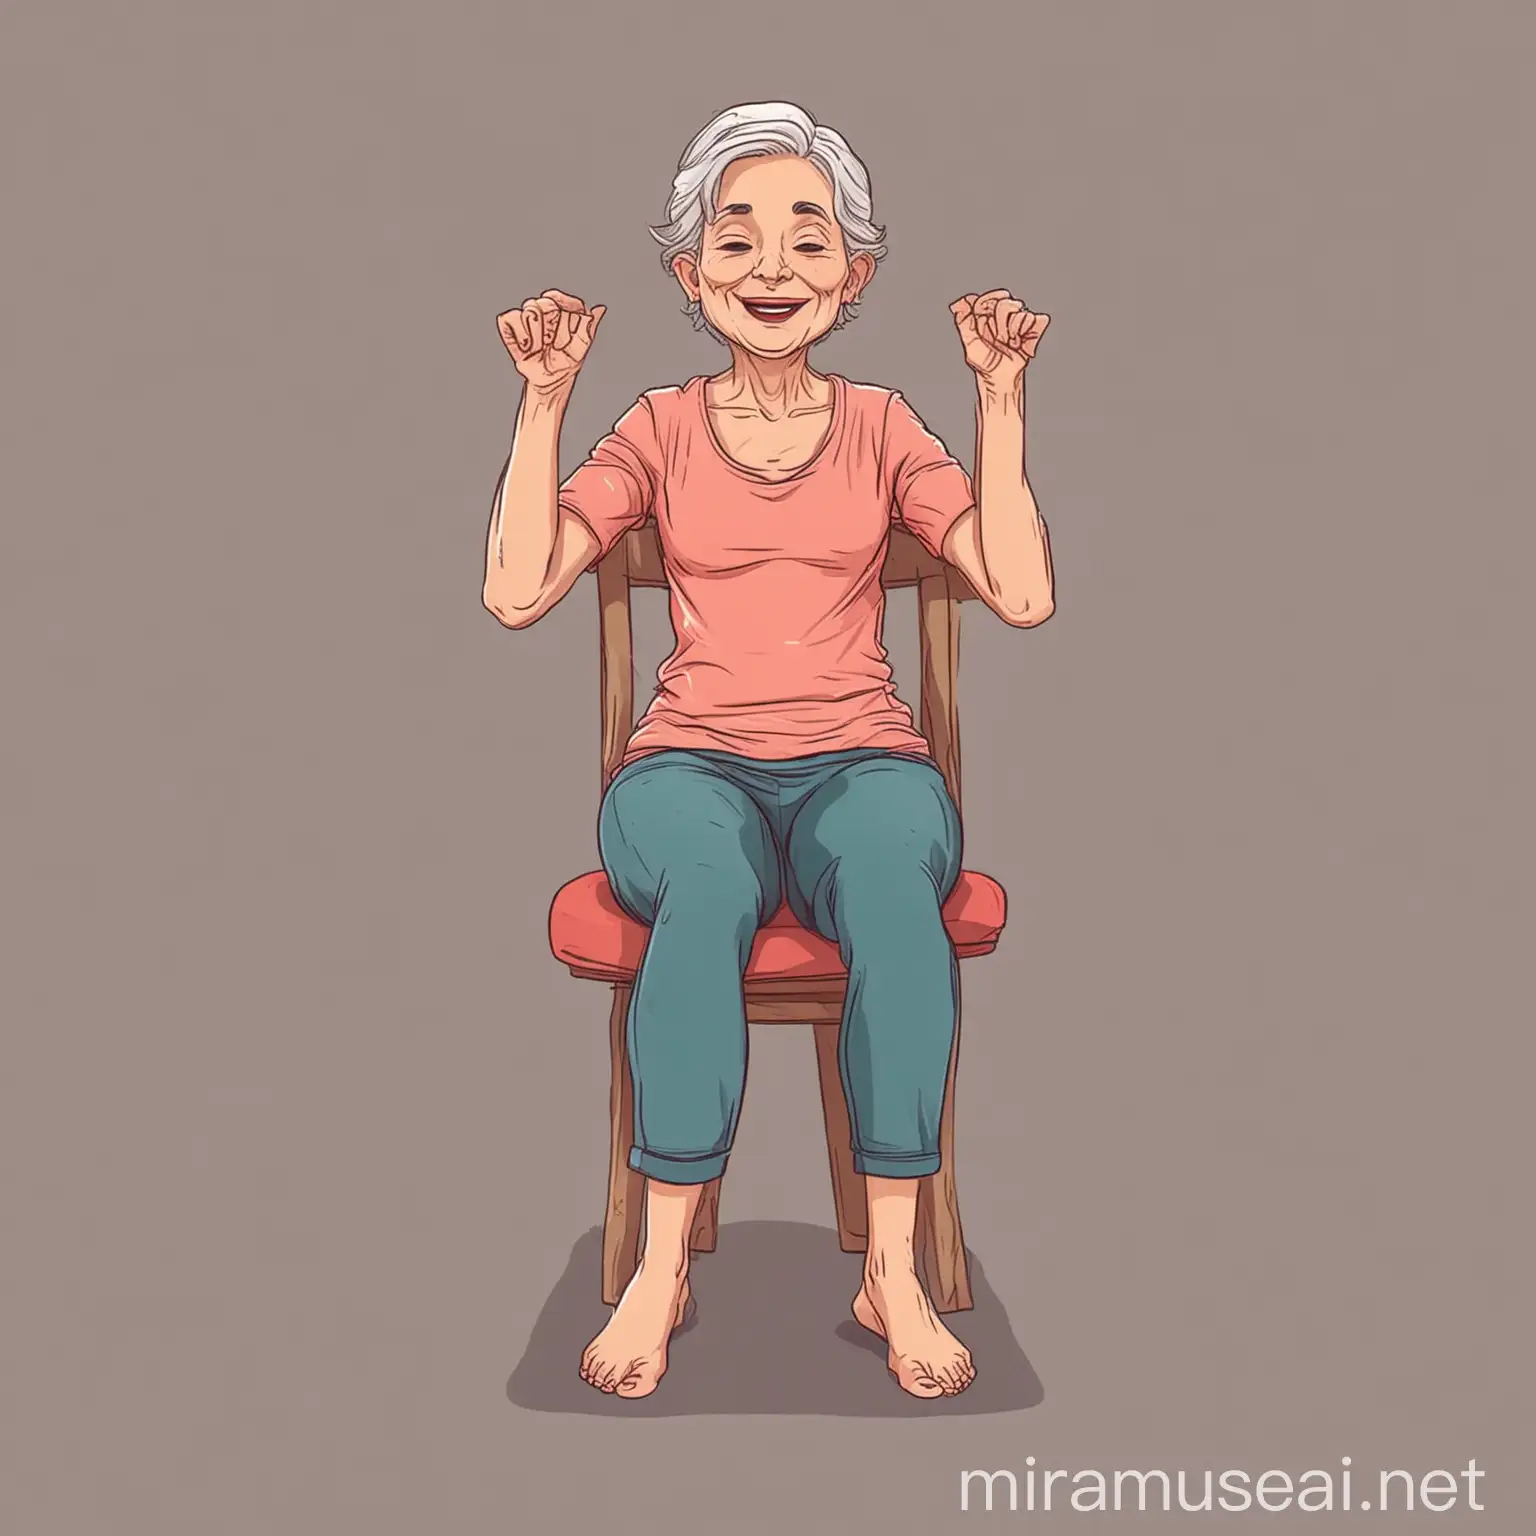 senior woman doing chair yoga pose in happy mood illustration style vector front view straight hands